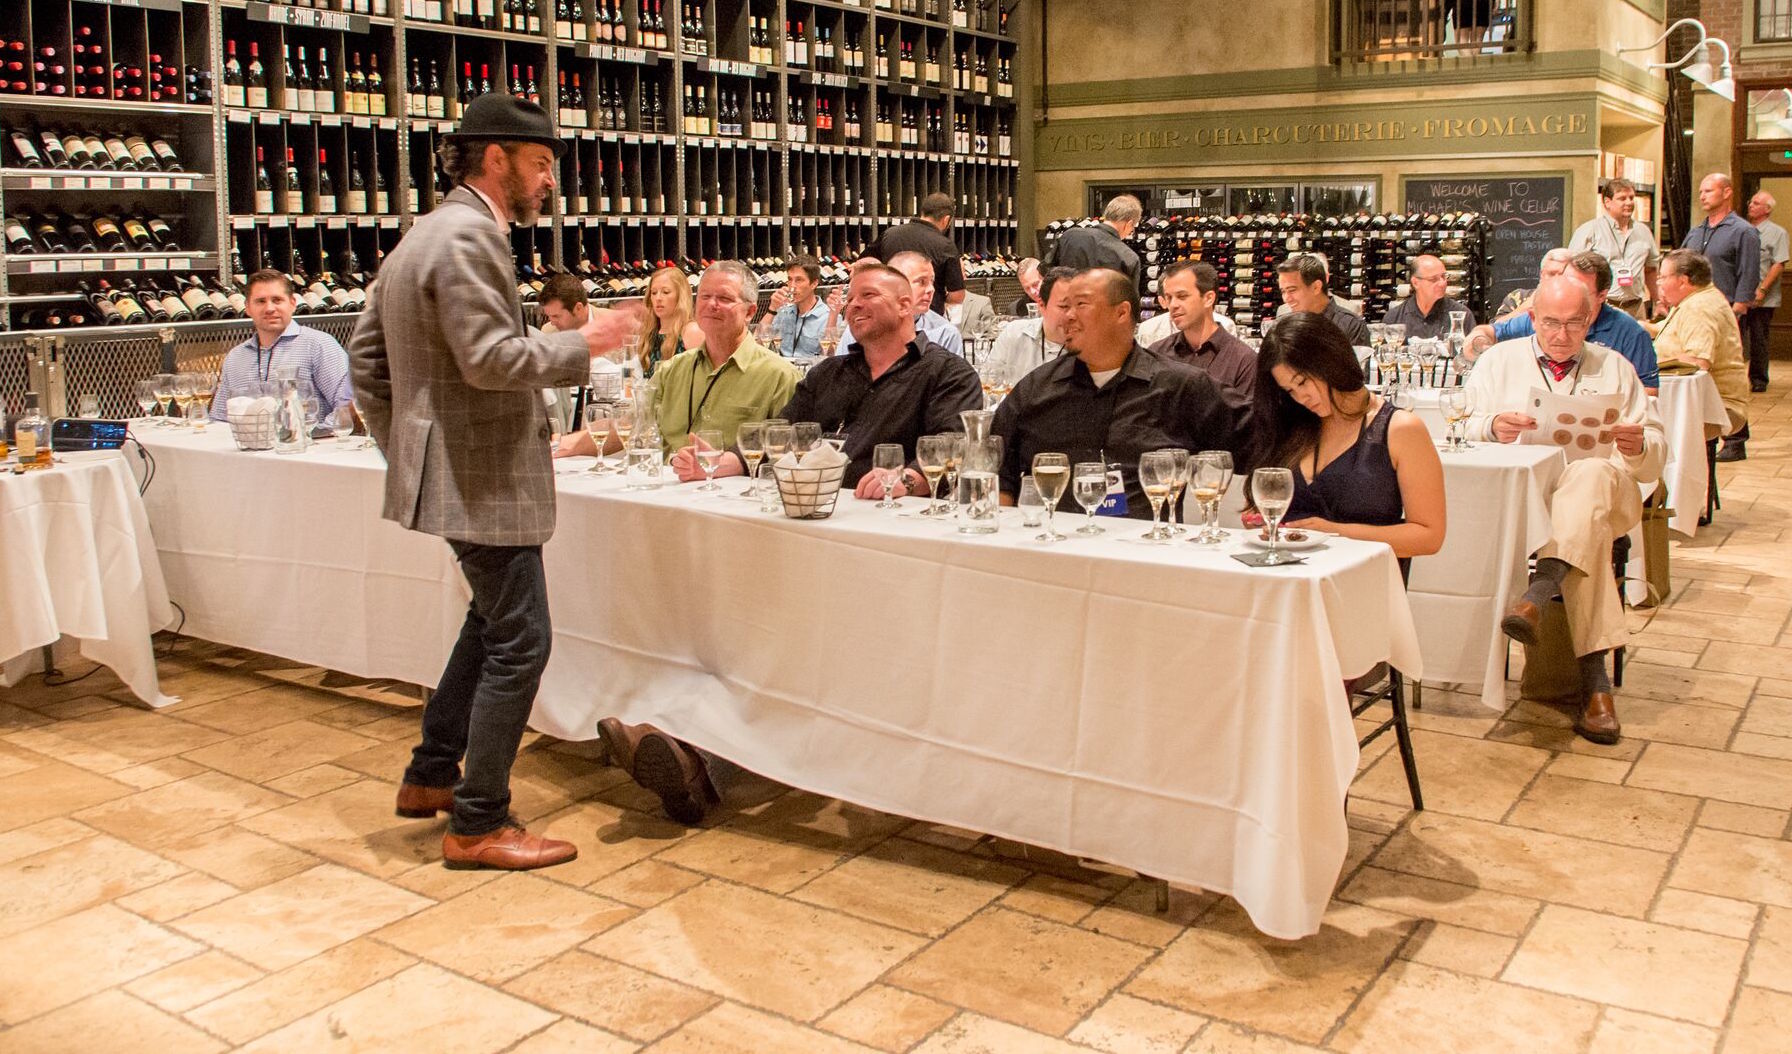 Intimate dinner tastings will give guests an up close and personal educational experience. Courtesy photo